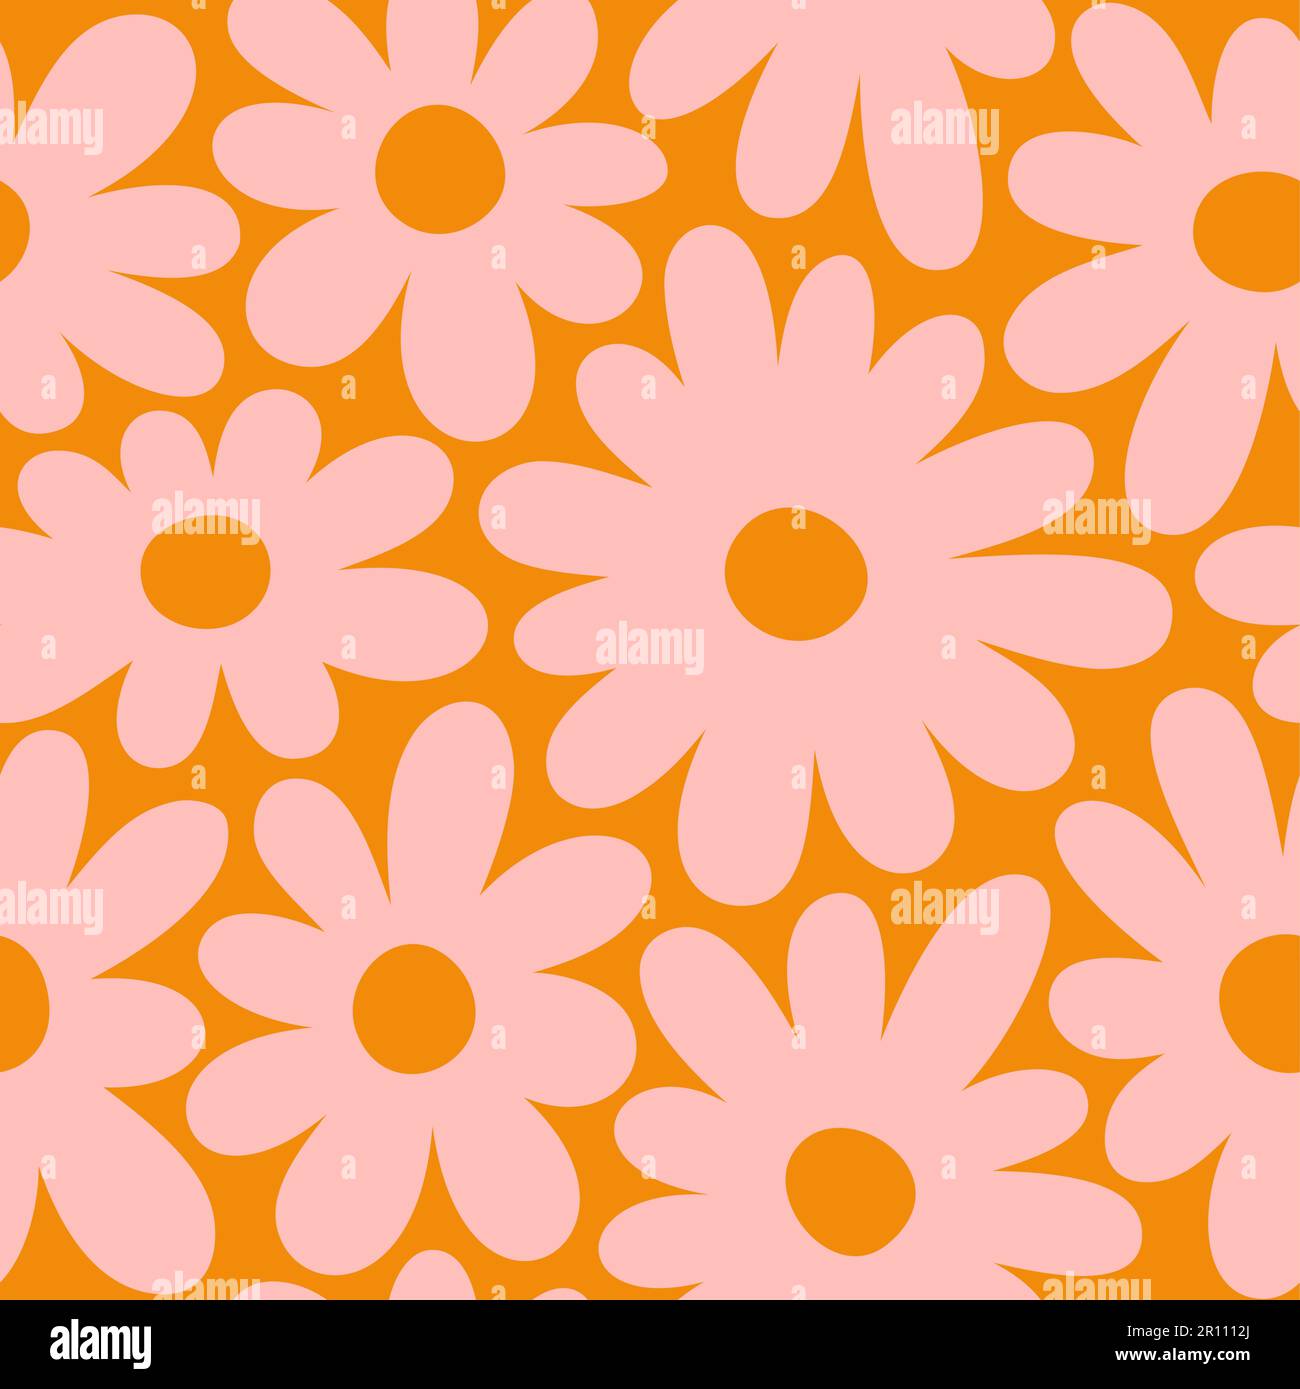 Groovy Daisy Flowers Seamless Pattern. Floral Vector Background in 1970s Hippie Retro Style for Print on Textile, Wrapping Paper, Web Design Stock Vector